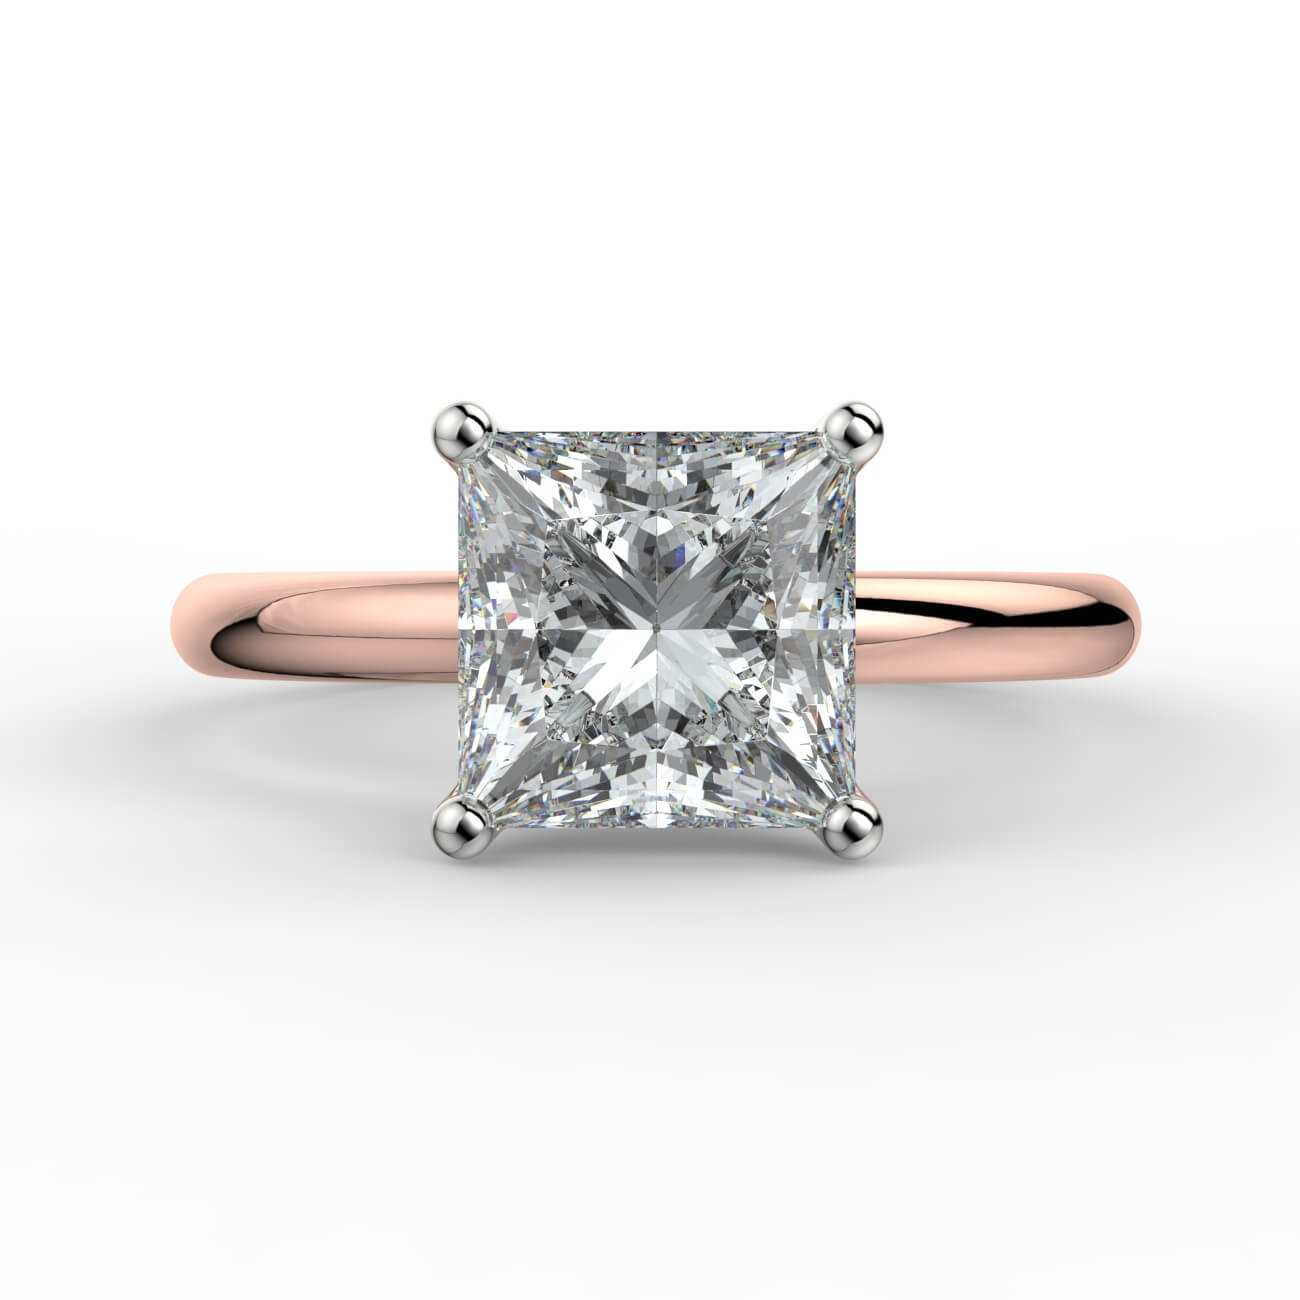 Solitaire princess cut diamond engagement ring in rose and white  gold – Australian Diamond Network